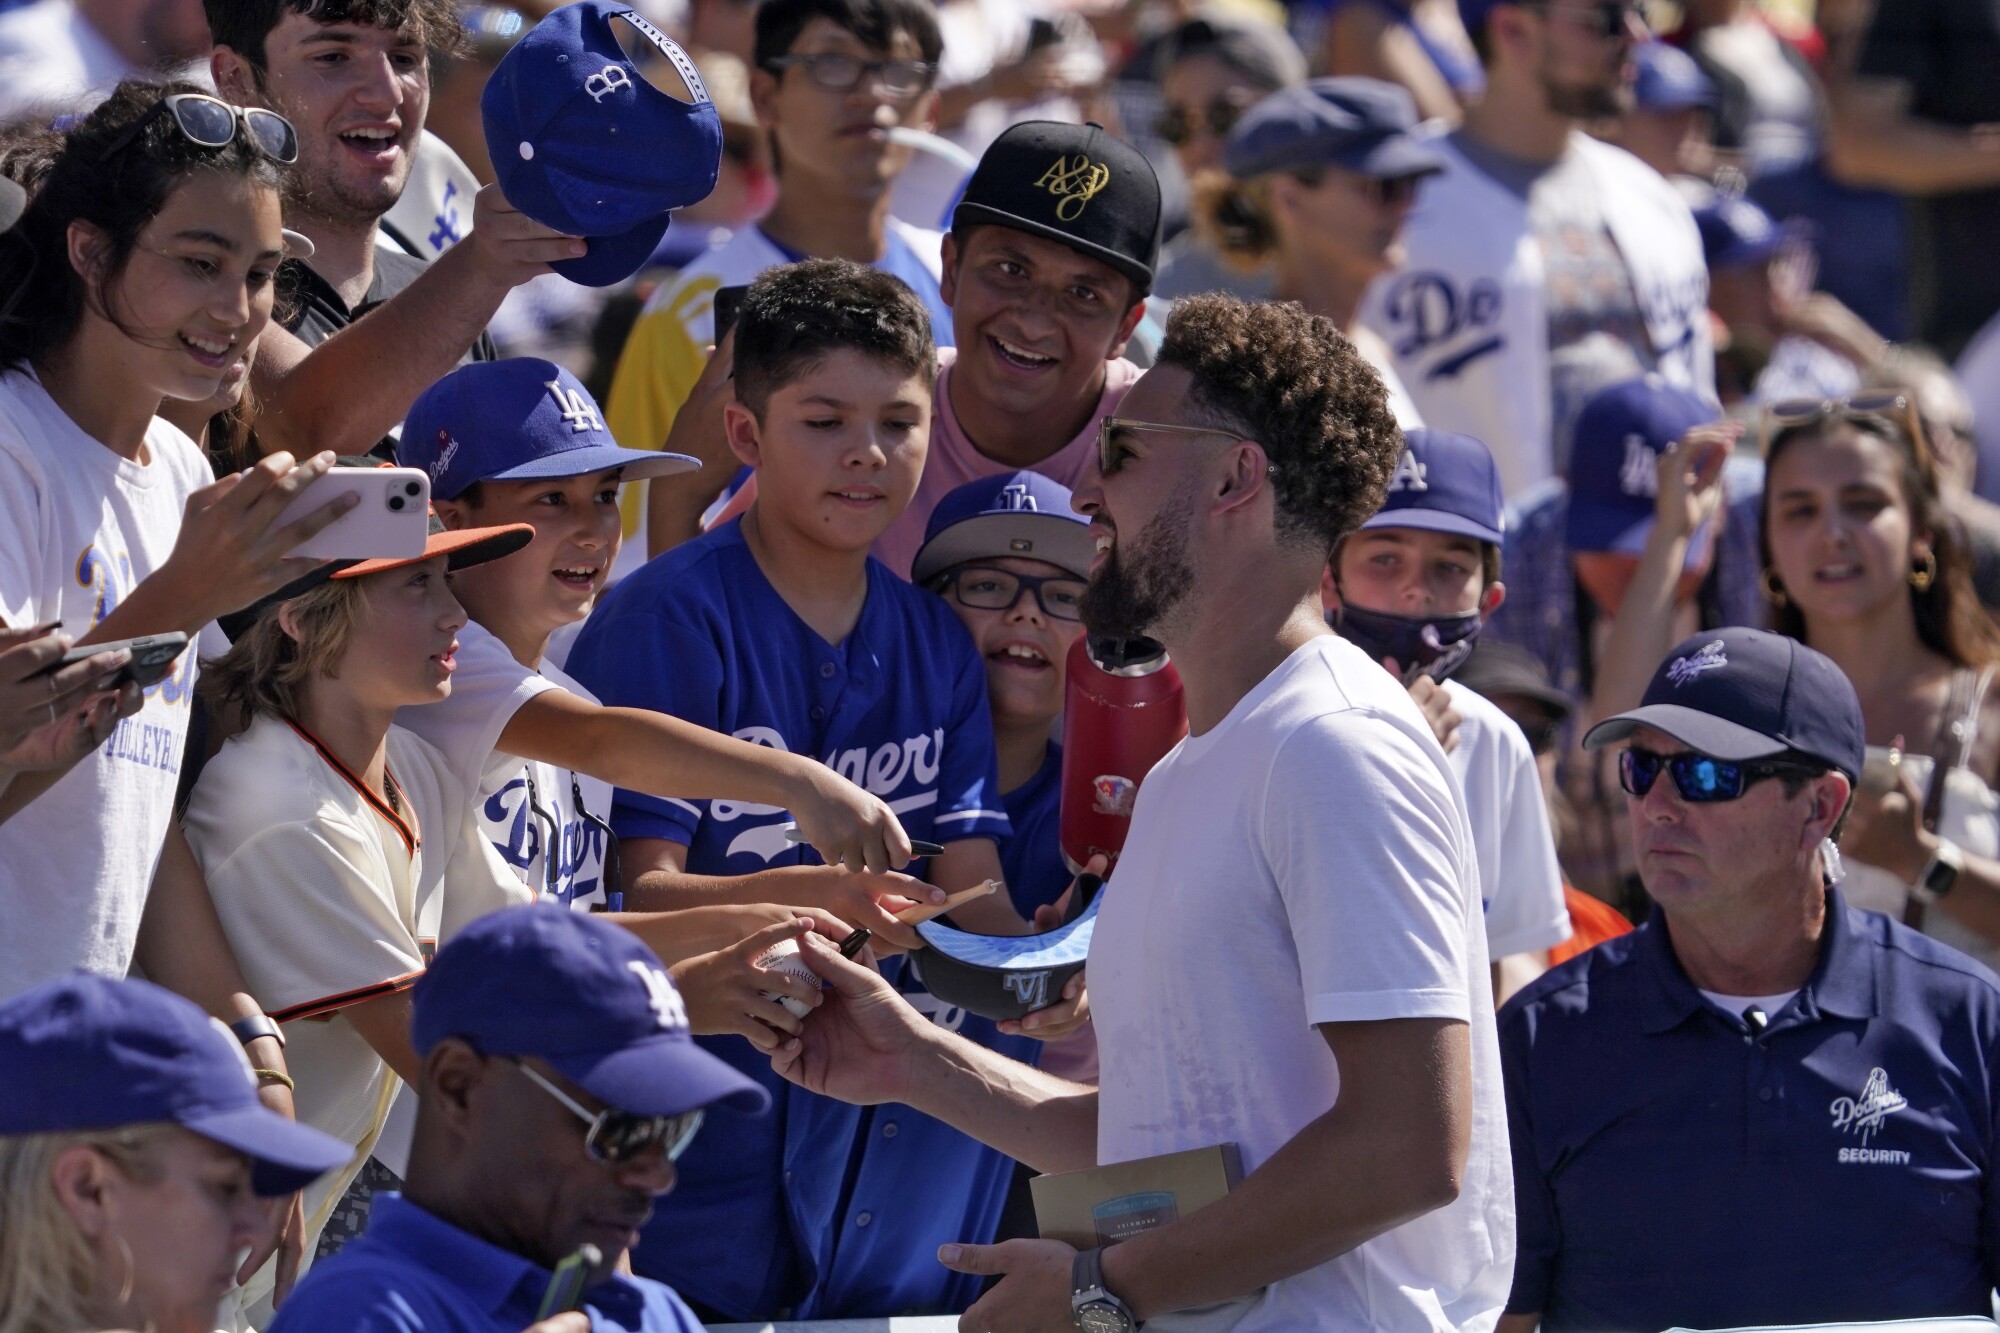 Golden State Warriors star Klay Thompson signs autographs for fans as he watches the Dodgers play the San Francisco Giants.